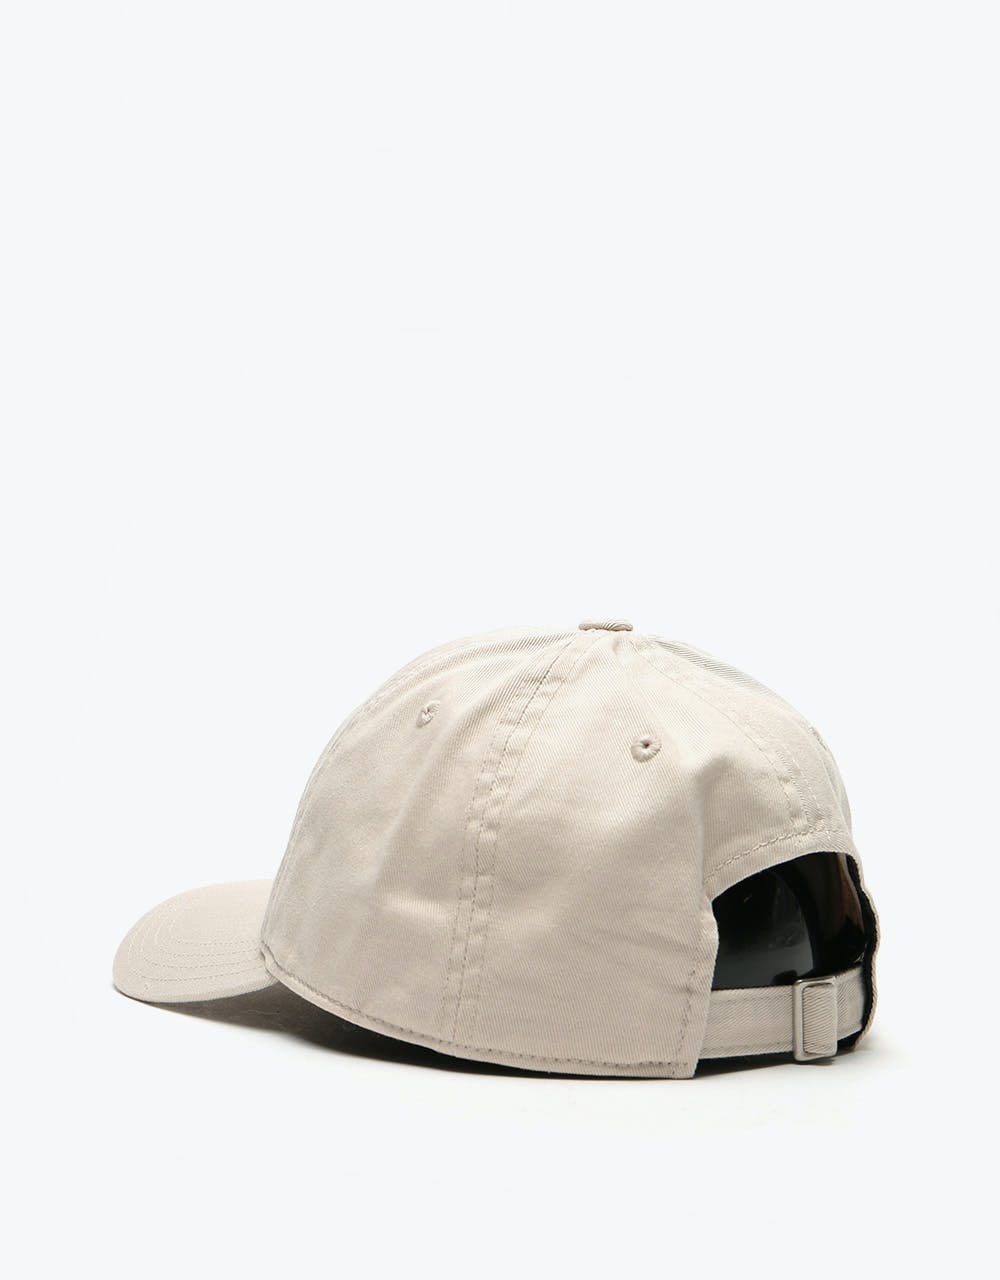 Route One Shade Cap - Beige